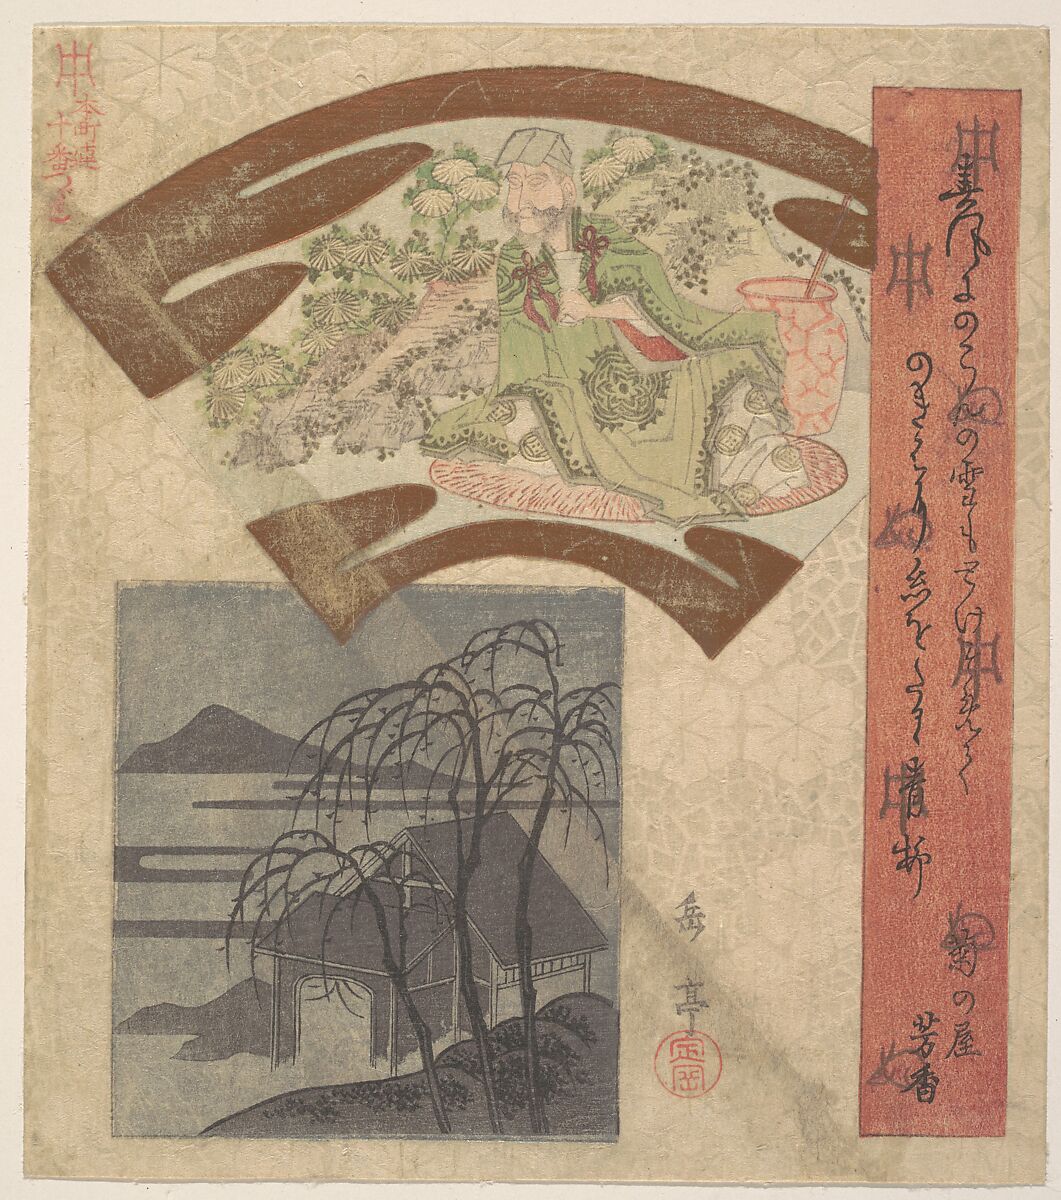 Fan-shaped Design Depicting Chinese Poet or Philosopher, Yashima Gakutei (Japanese, 1786?–1868), Woodblock print (surimono); ink and color on paper, Japan 